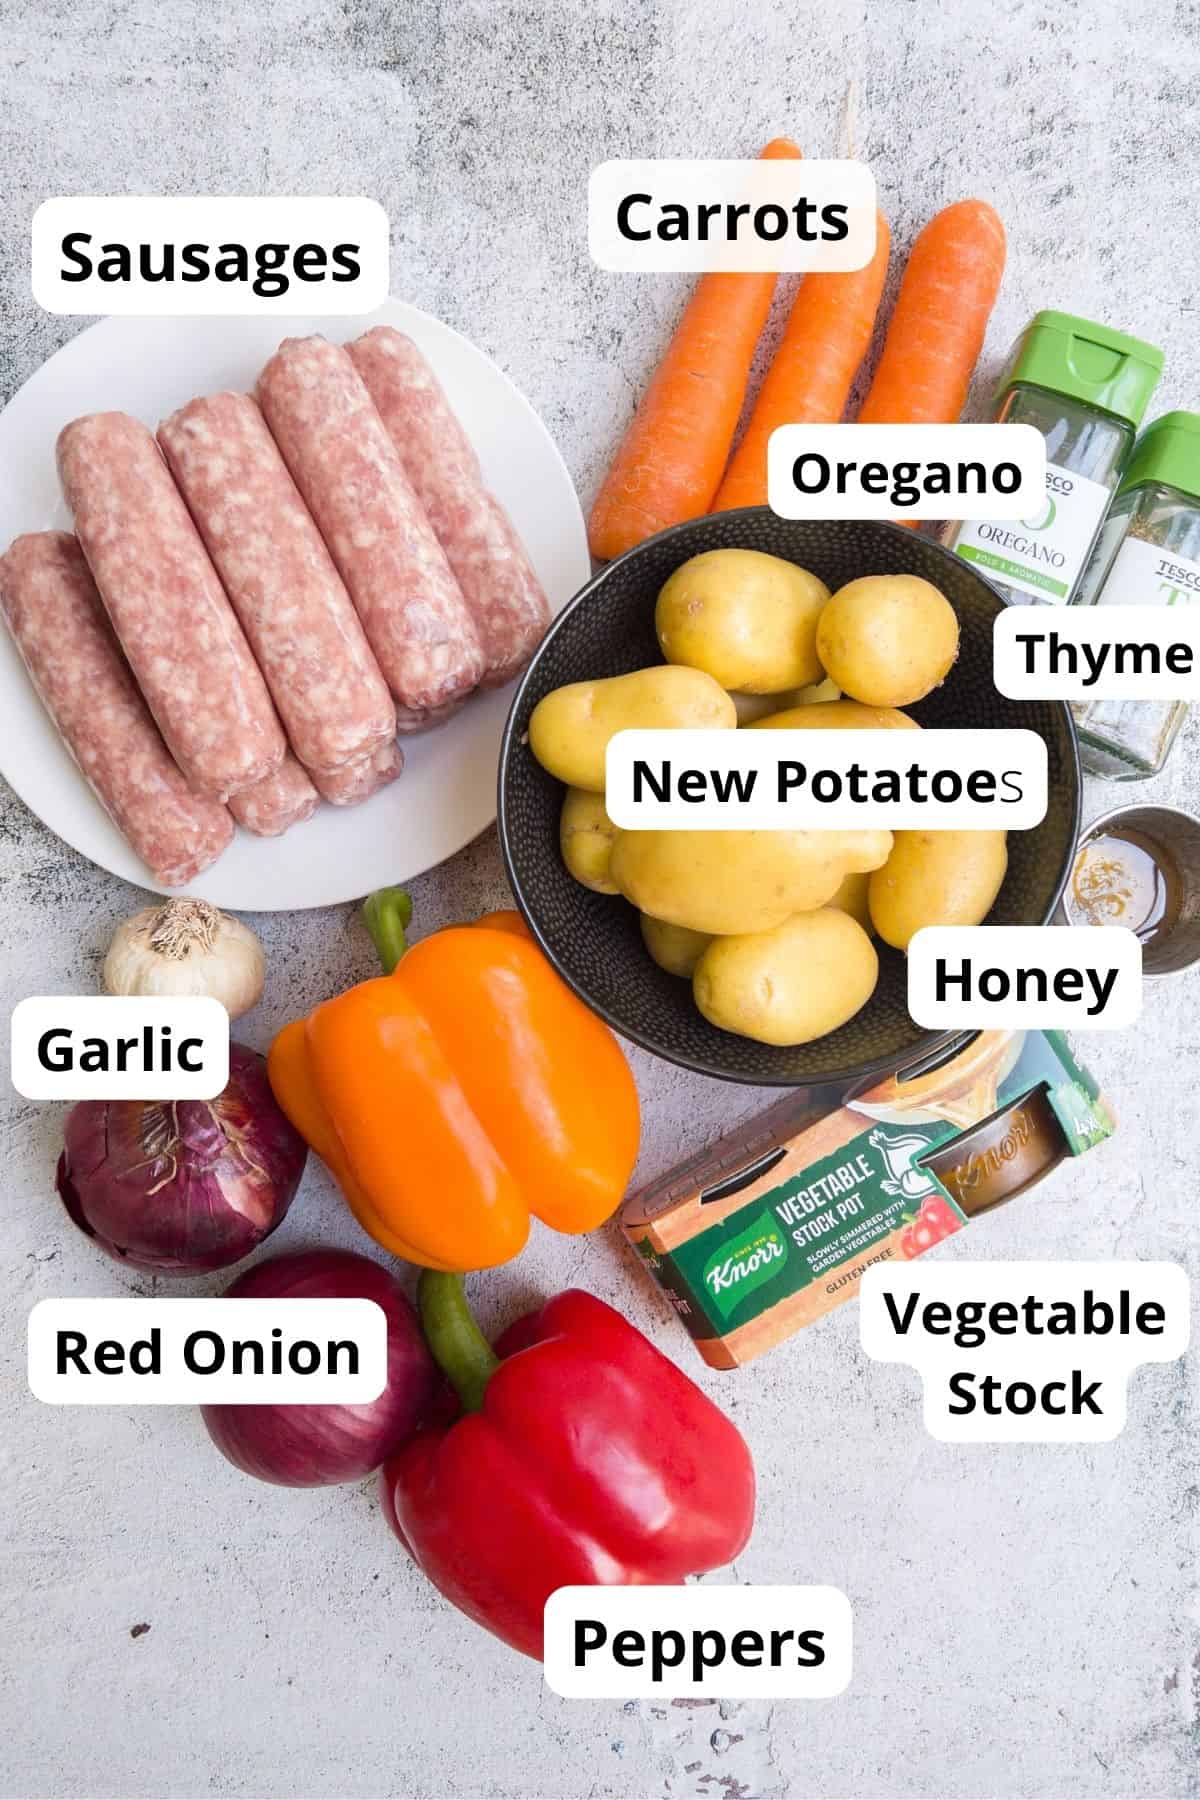 Ingredients for a sausage traybake including potatoes and peppers